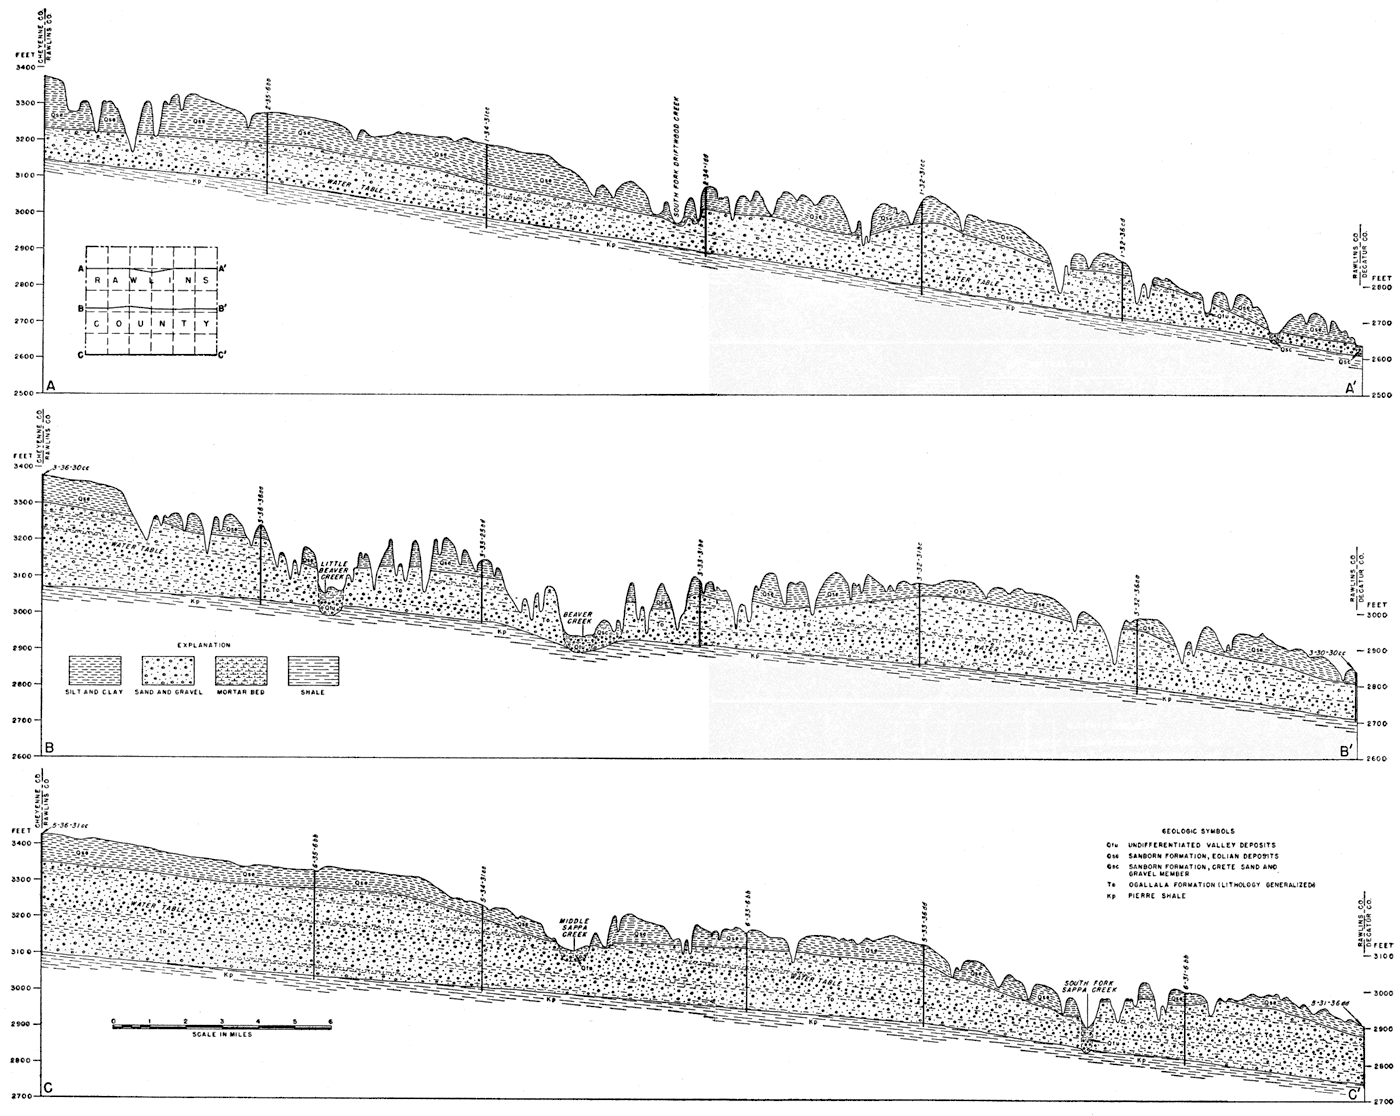 Three east-west cross sections; sand and gravel layers between top silt and clay and Pierre shale; sand and gravel consistent in thickness in east-west direction, thins from south to north.